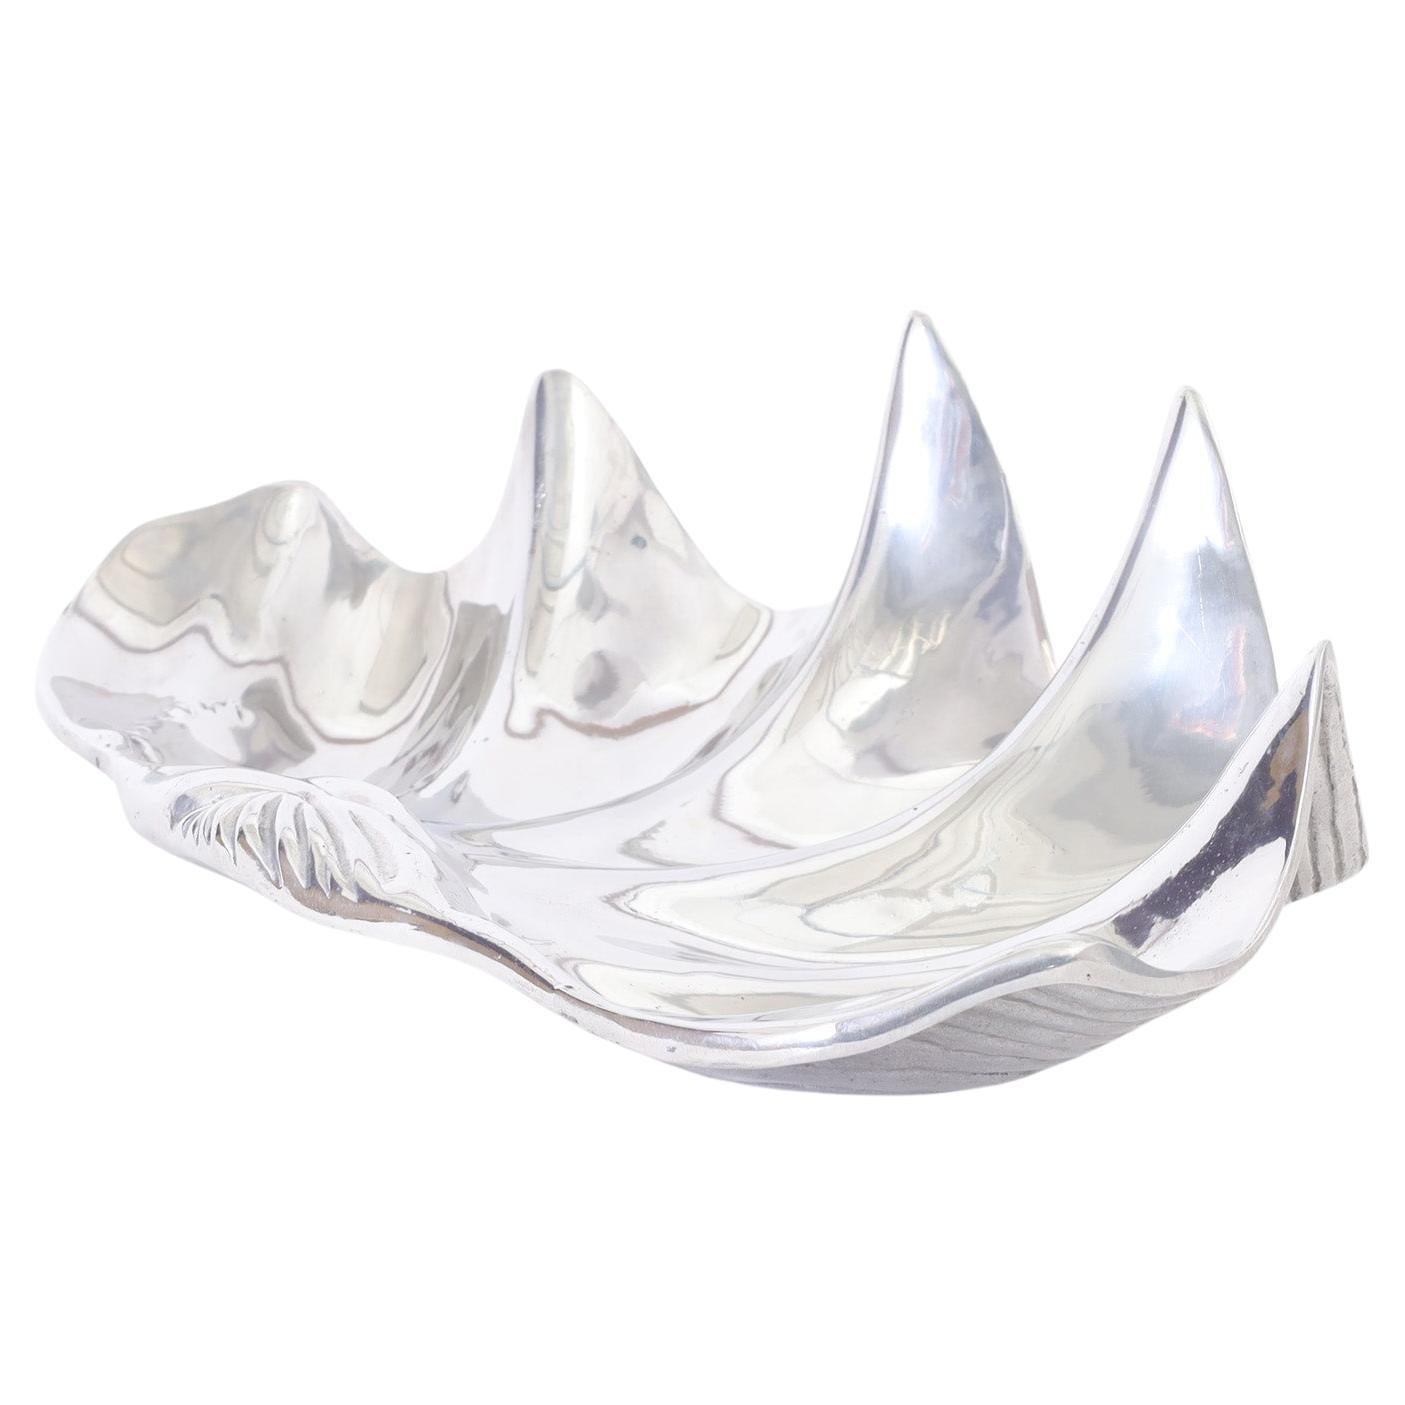 Mid century bowl crafted in cast and polished aluminum in the iconic clam shell form. Signed in the cast on the bottom.